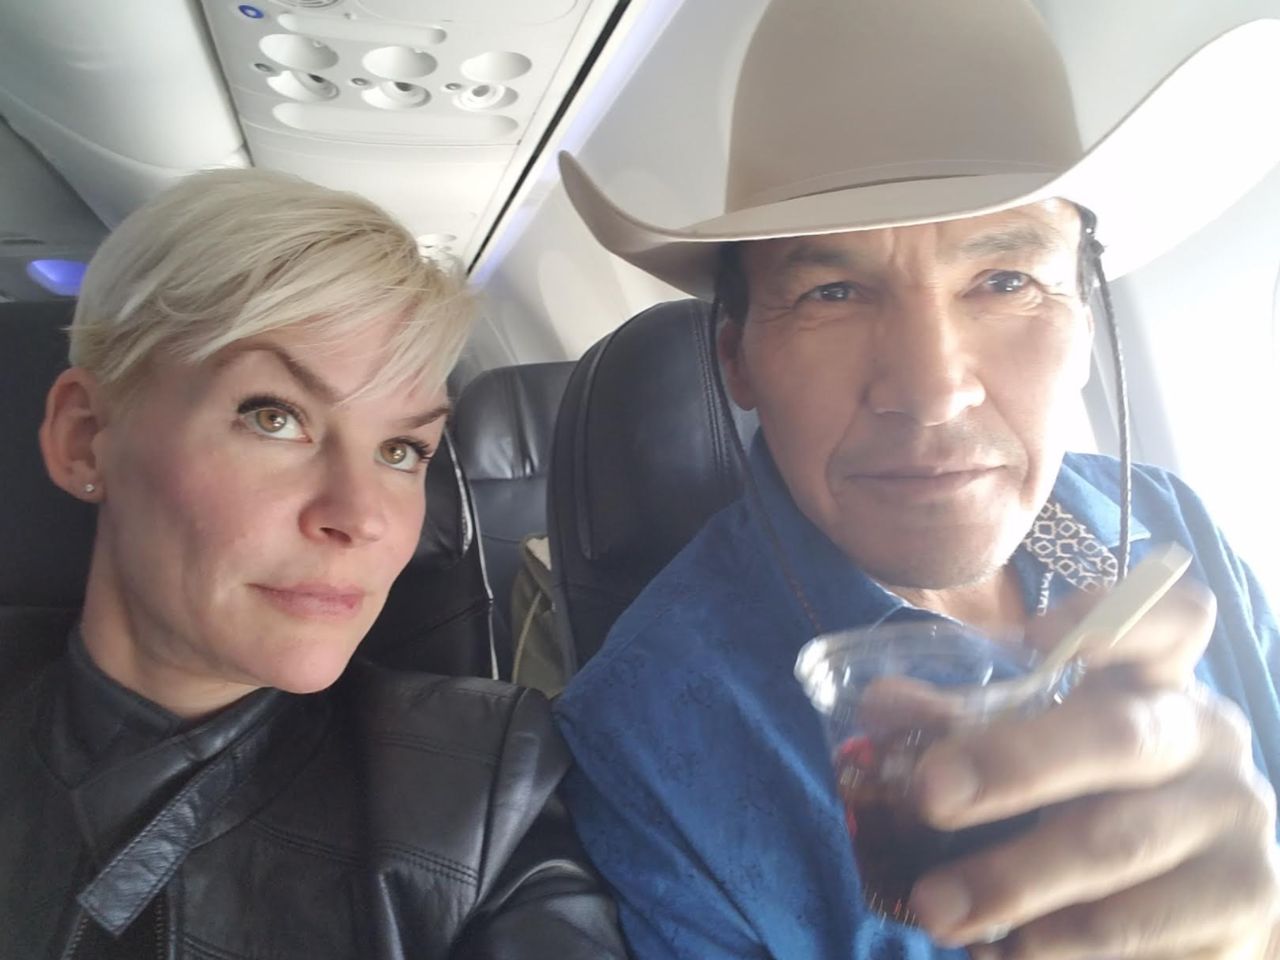 The author and her boyfriend, Rod, on the plane to Reno, Nevada.